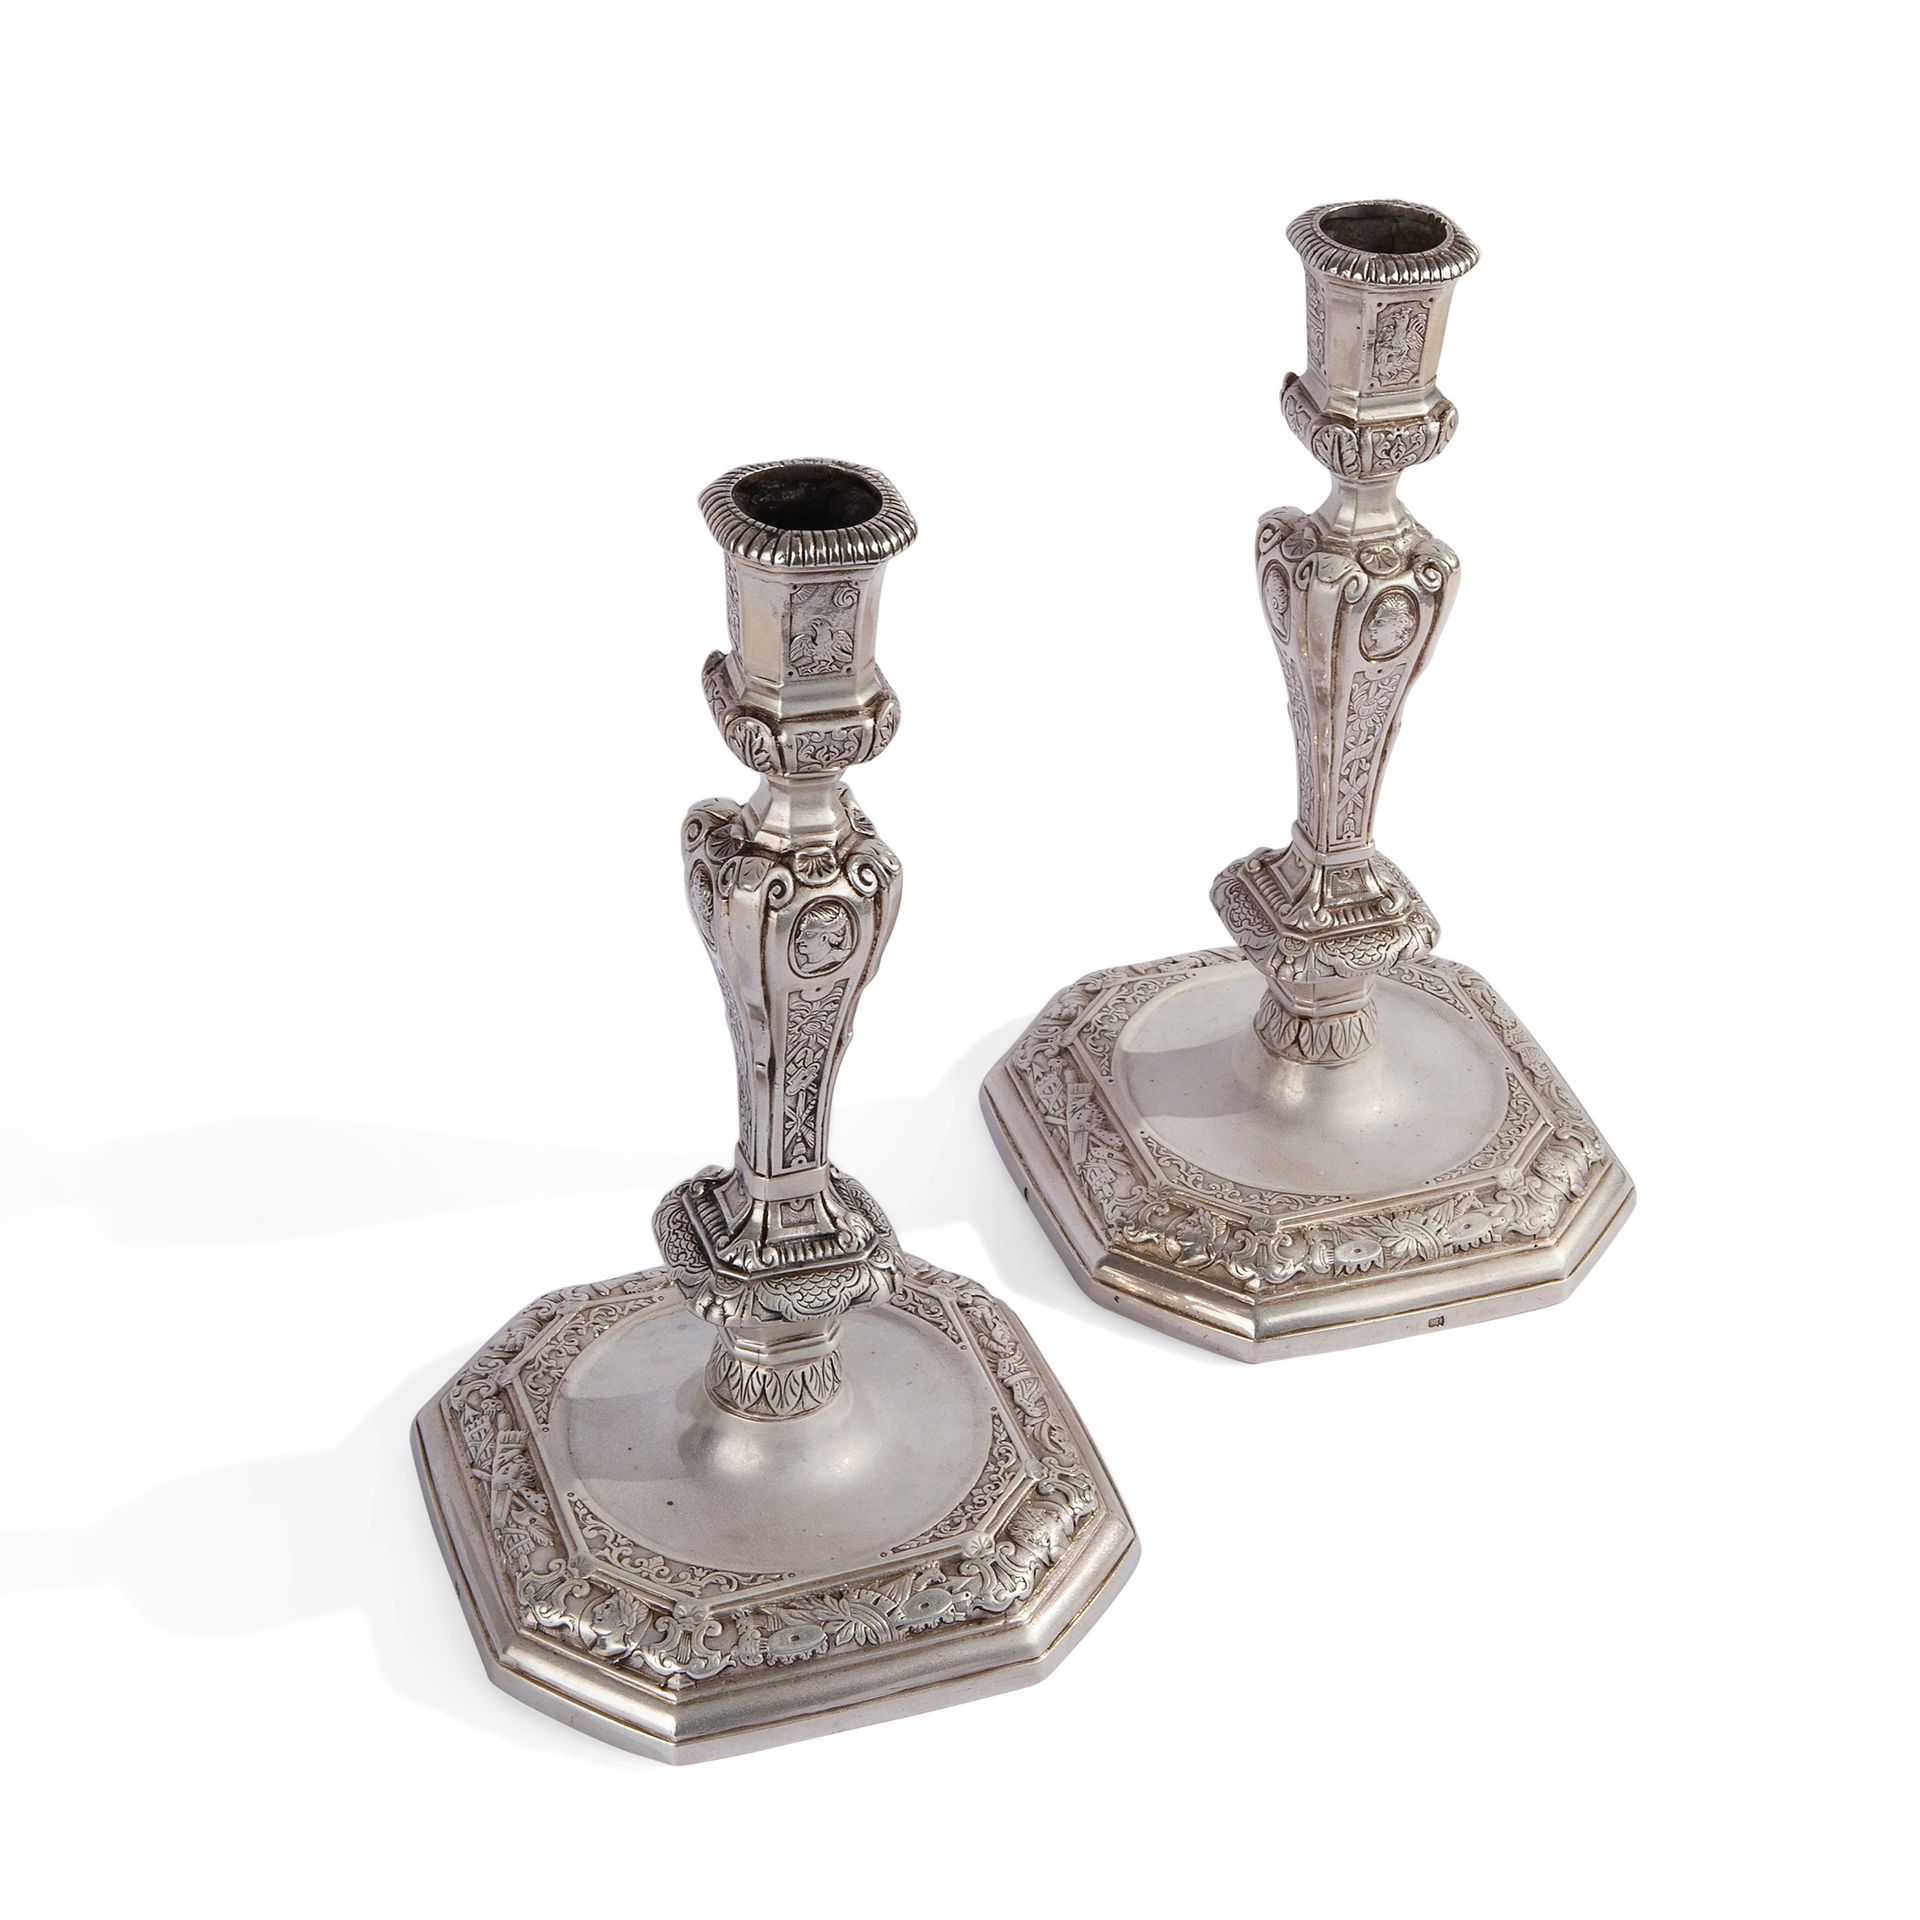 Pair of chased cast silver candlesticks, 18th century They bear marks of Dutch i&hellip;